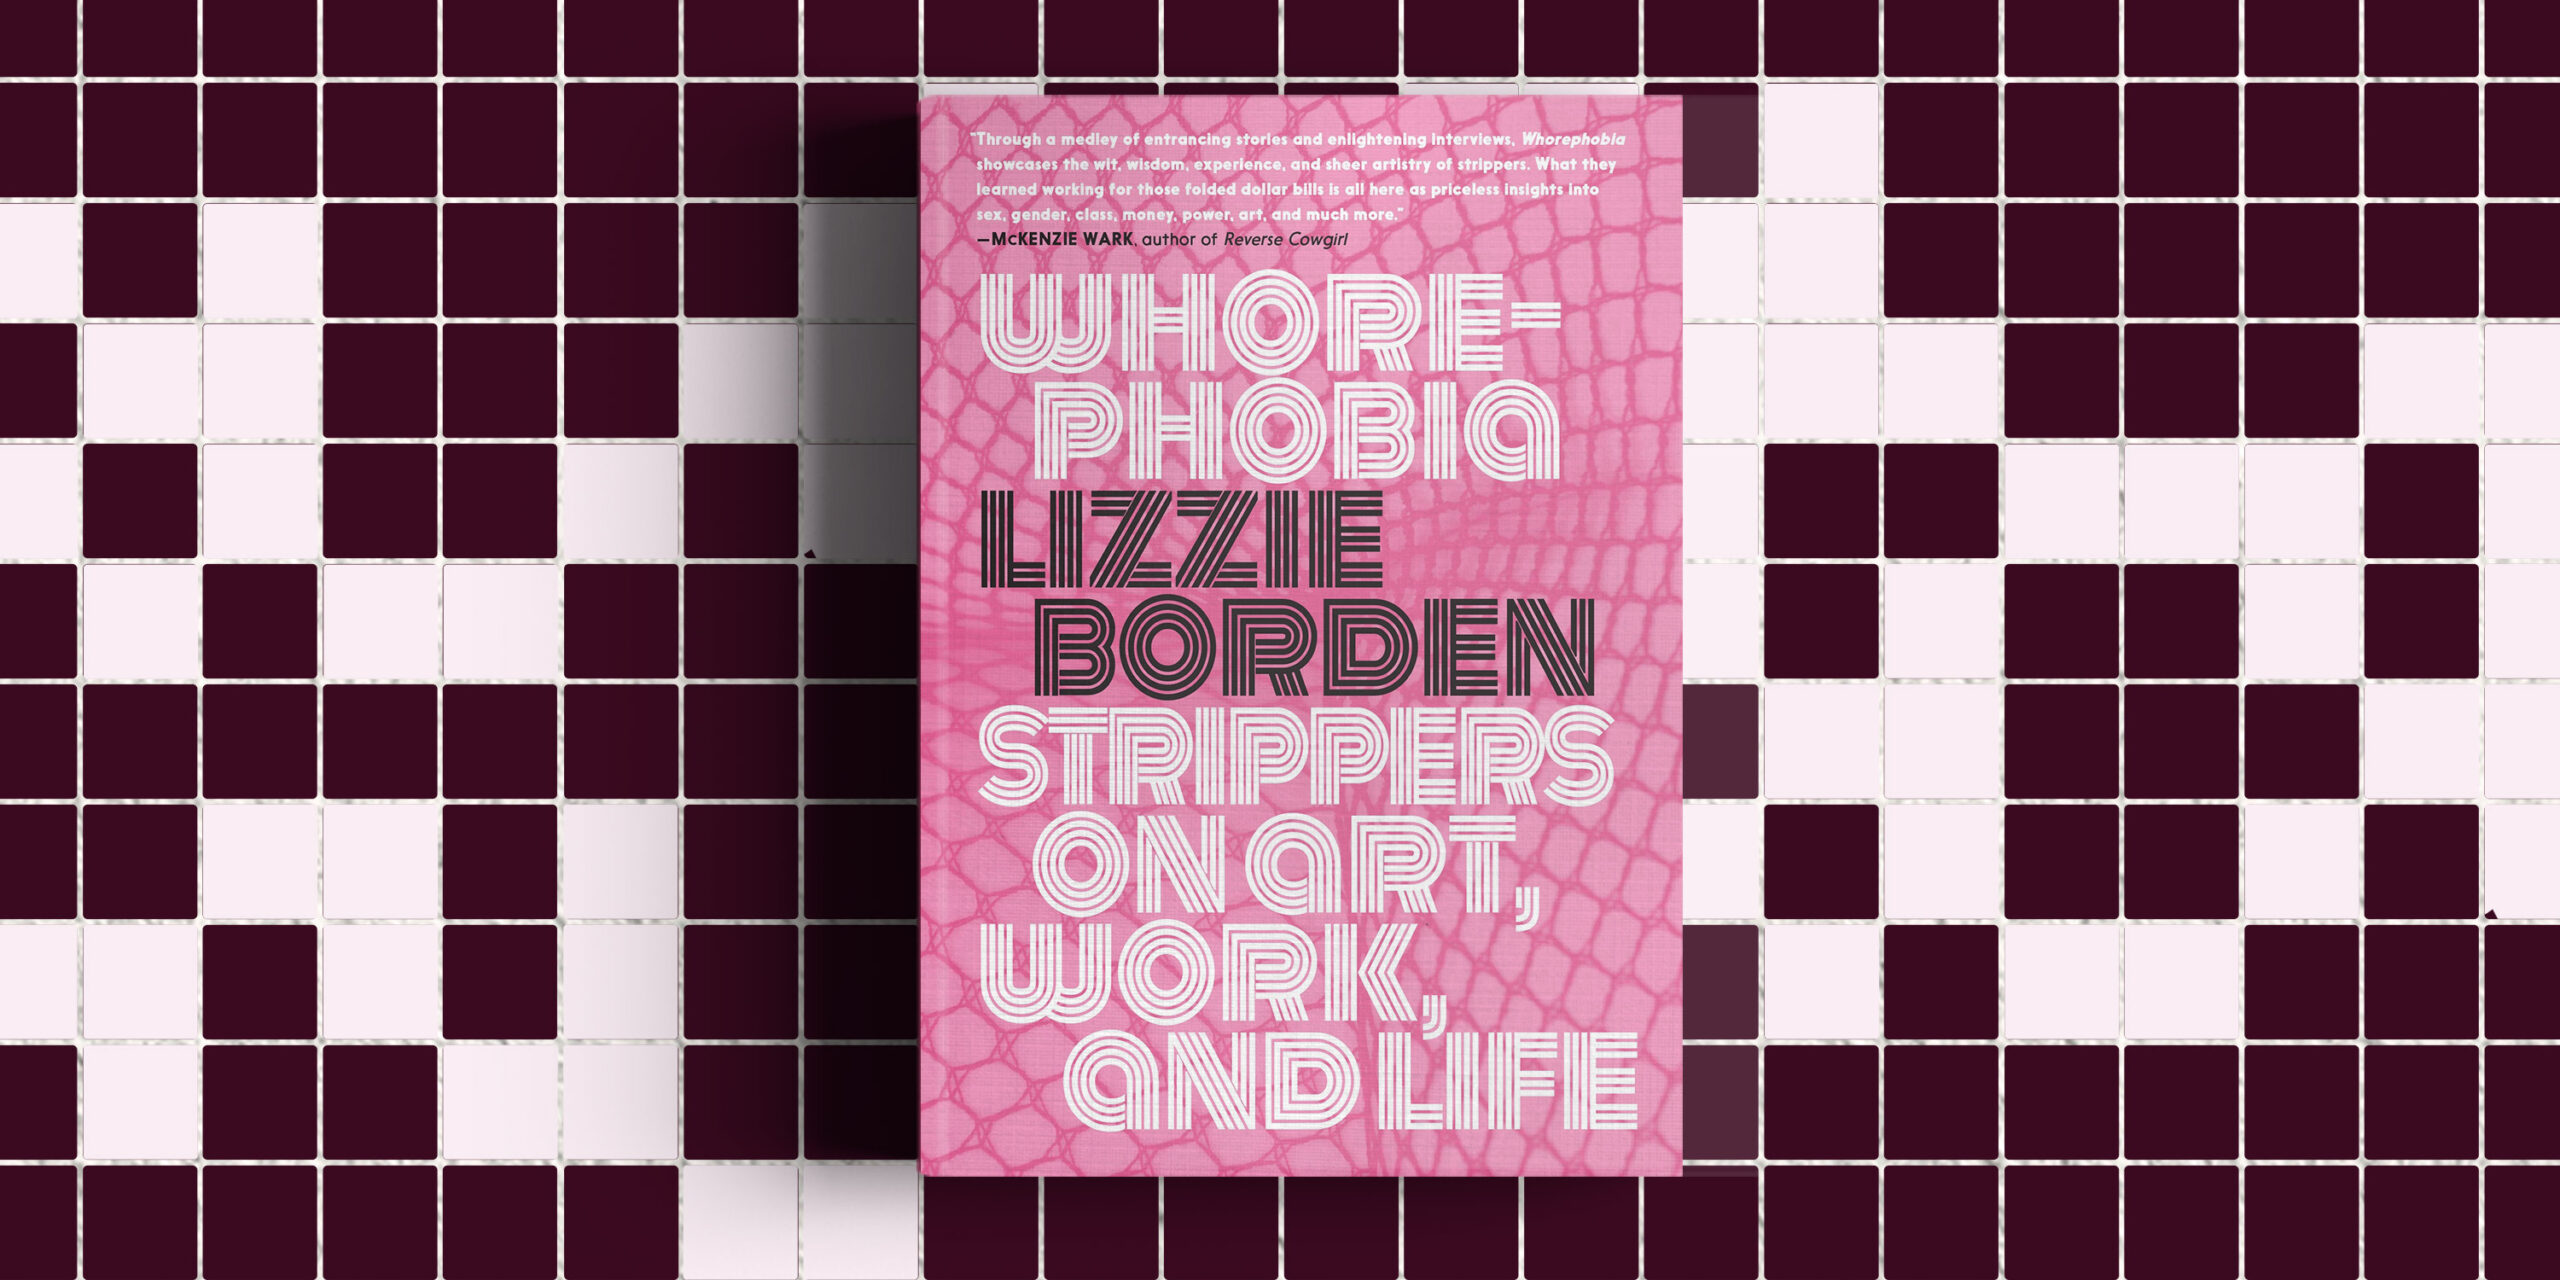 Book cover for Whorephobia: Strippers on Art, Work, and Life, edited by Lizzie Borden. The cover is a bright pink with an abstract fishnet design in a darker pink, with a fun 70s font on top.